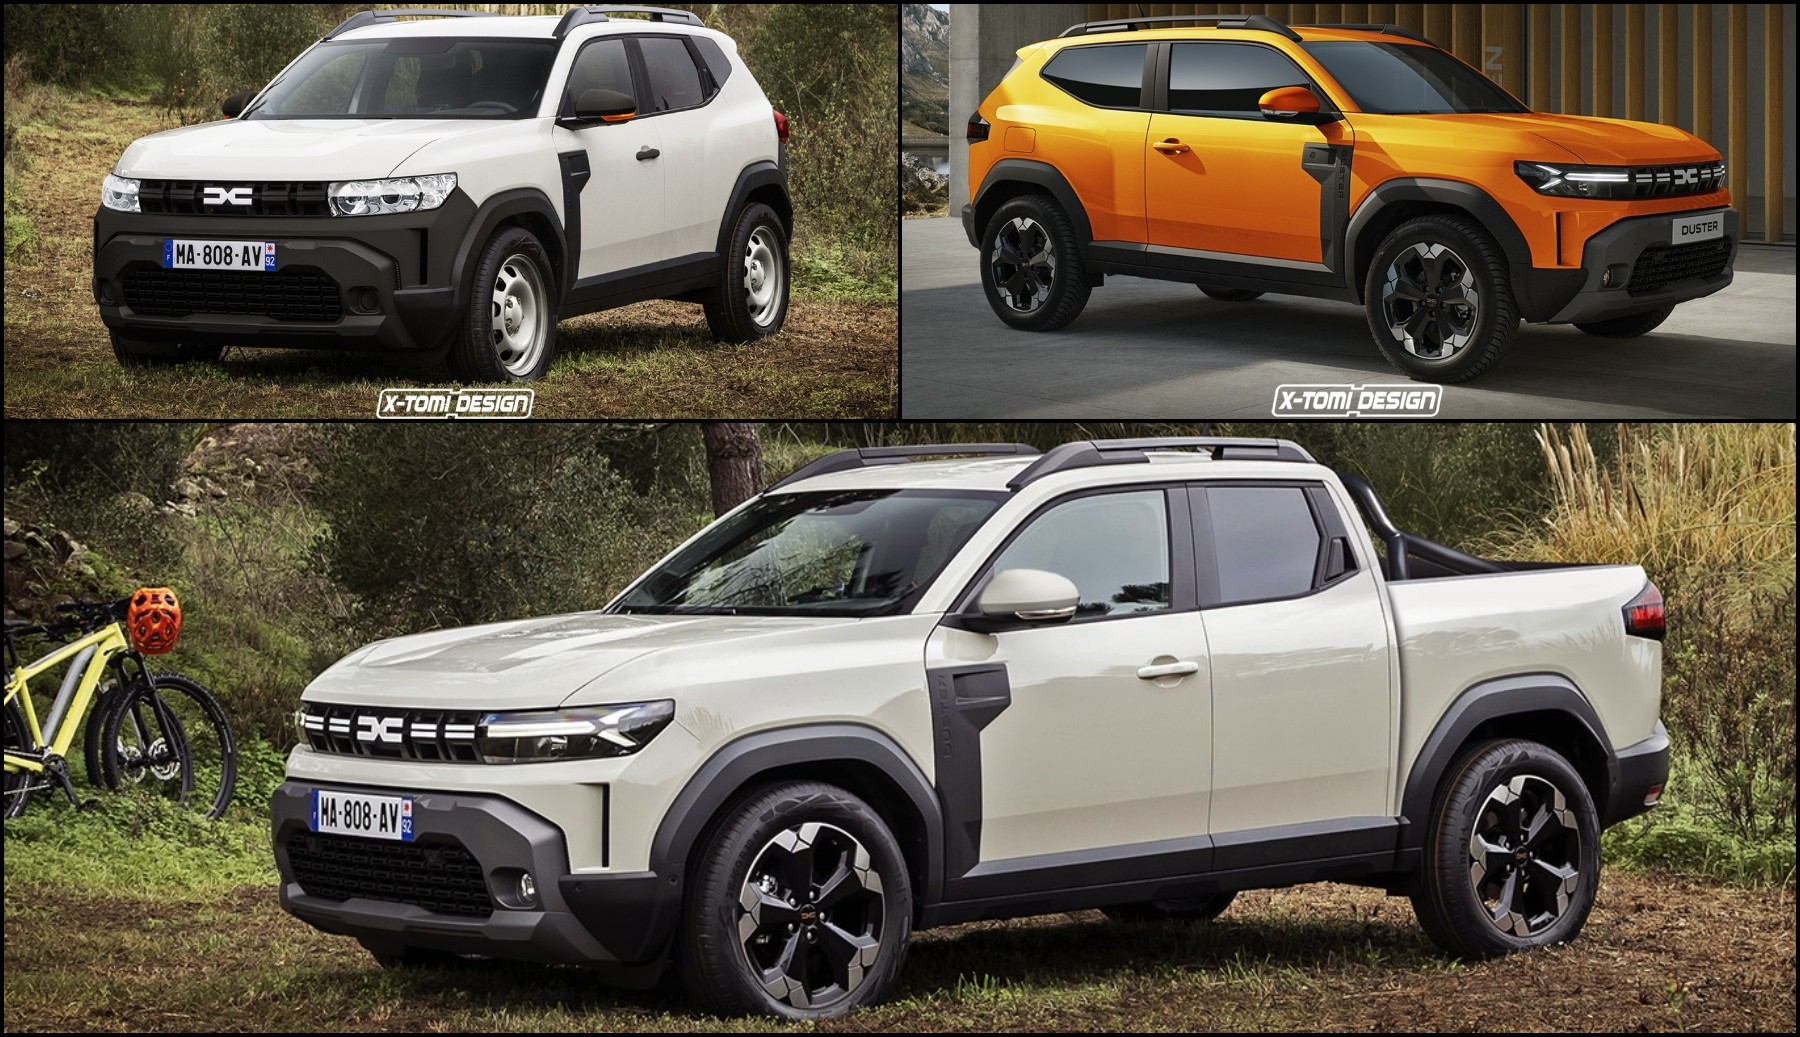 https://s1.cdn.autoevolution.com/images/news/gallery/2024-dacia-duster-pickup-truck-rendered-base-spec-and-3-door-suv-join-the-party_1.jpg